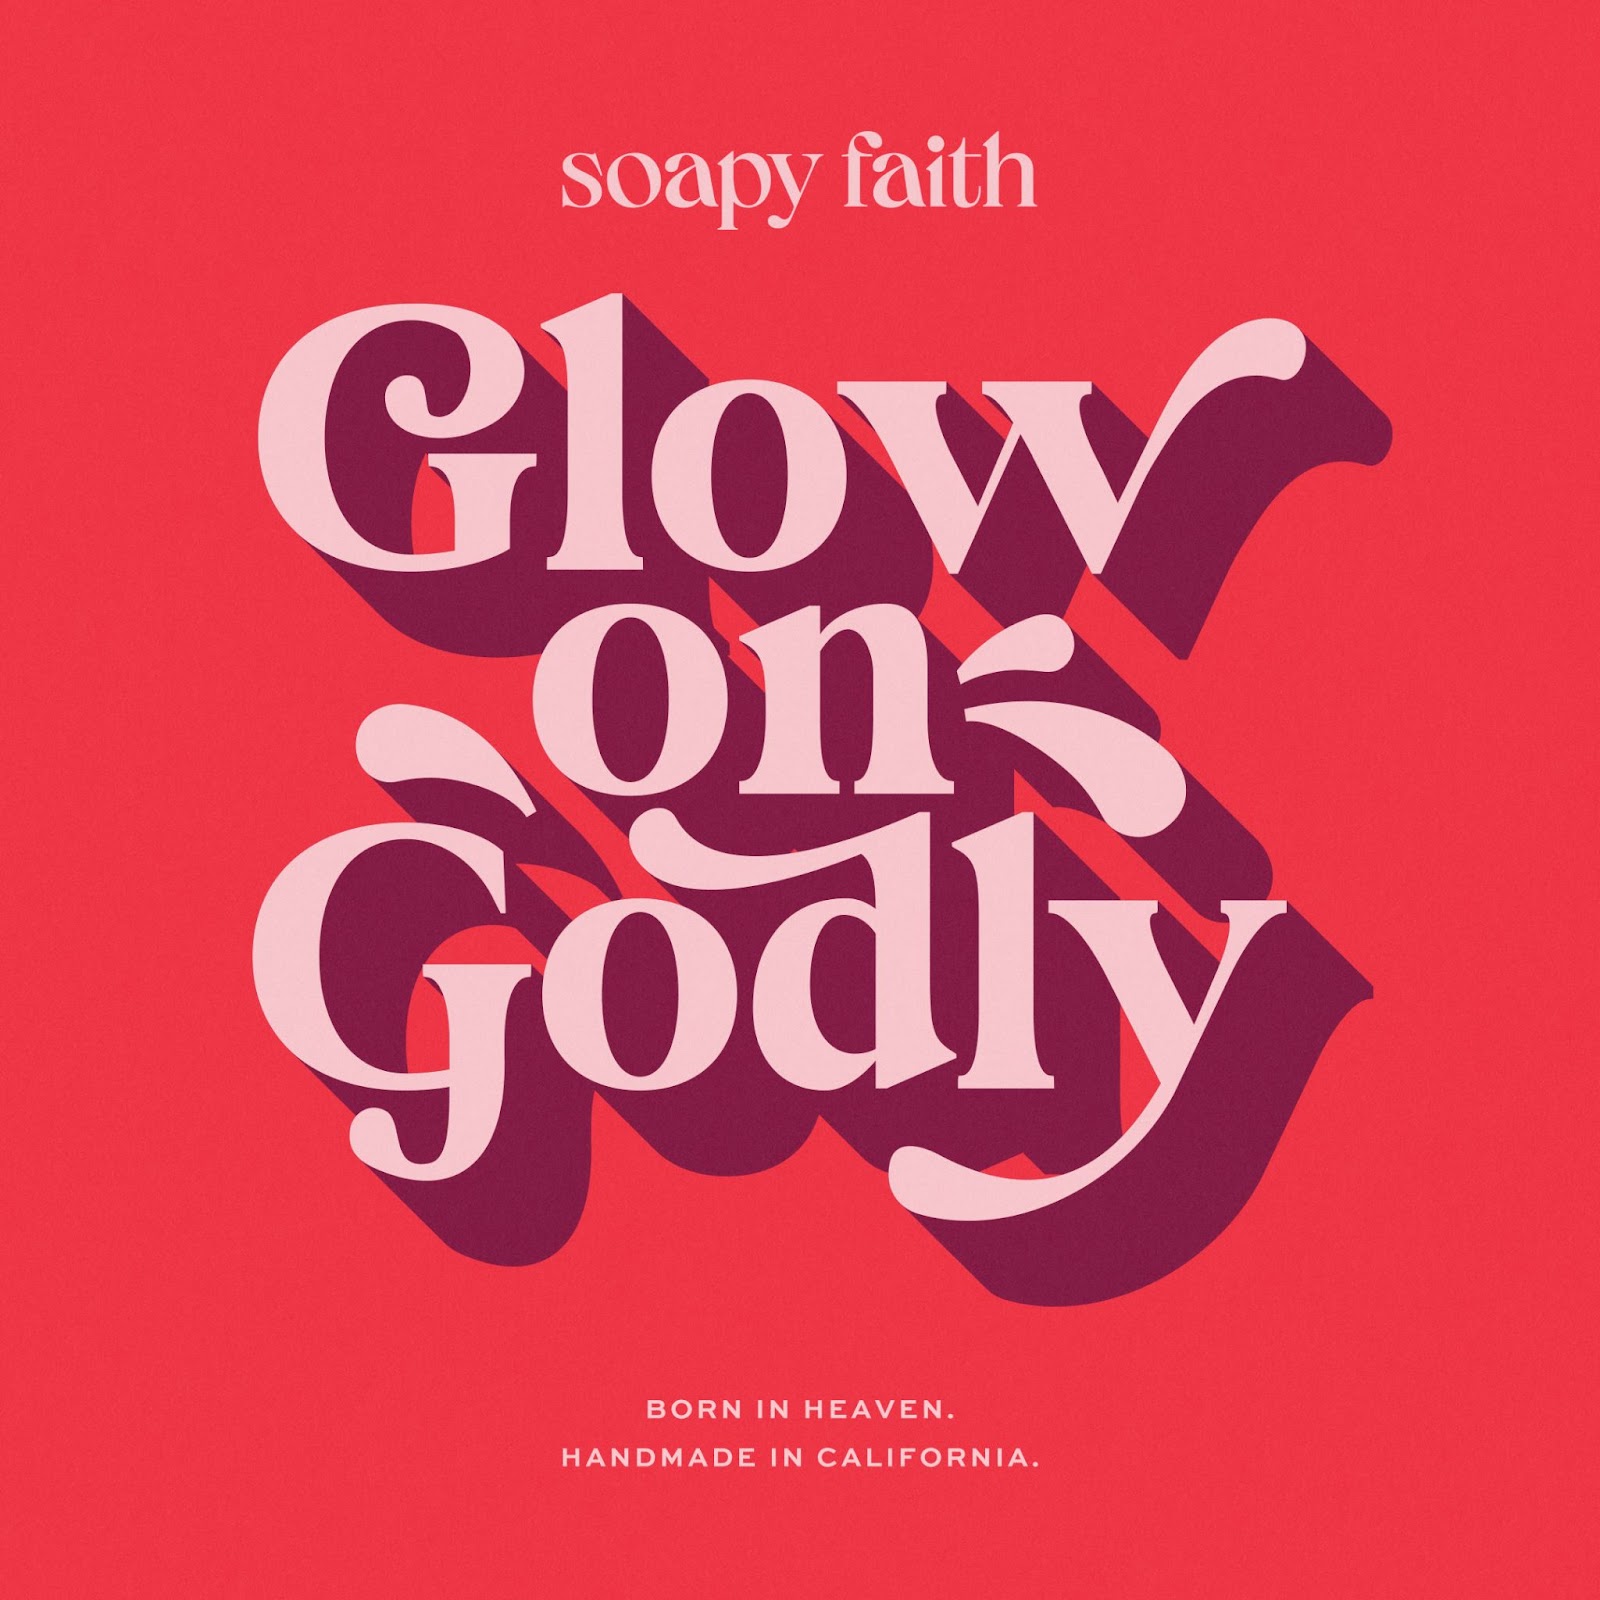 Branding and visual artifact for Soapy Faith